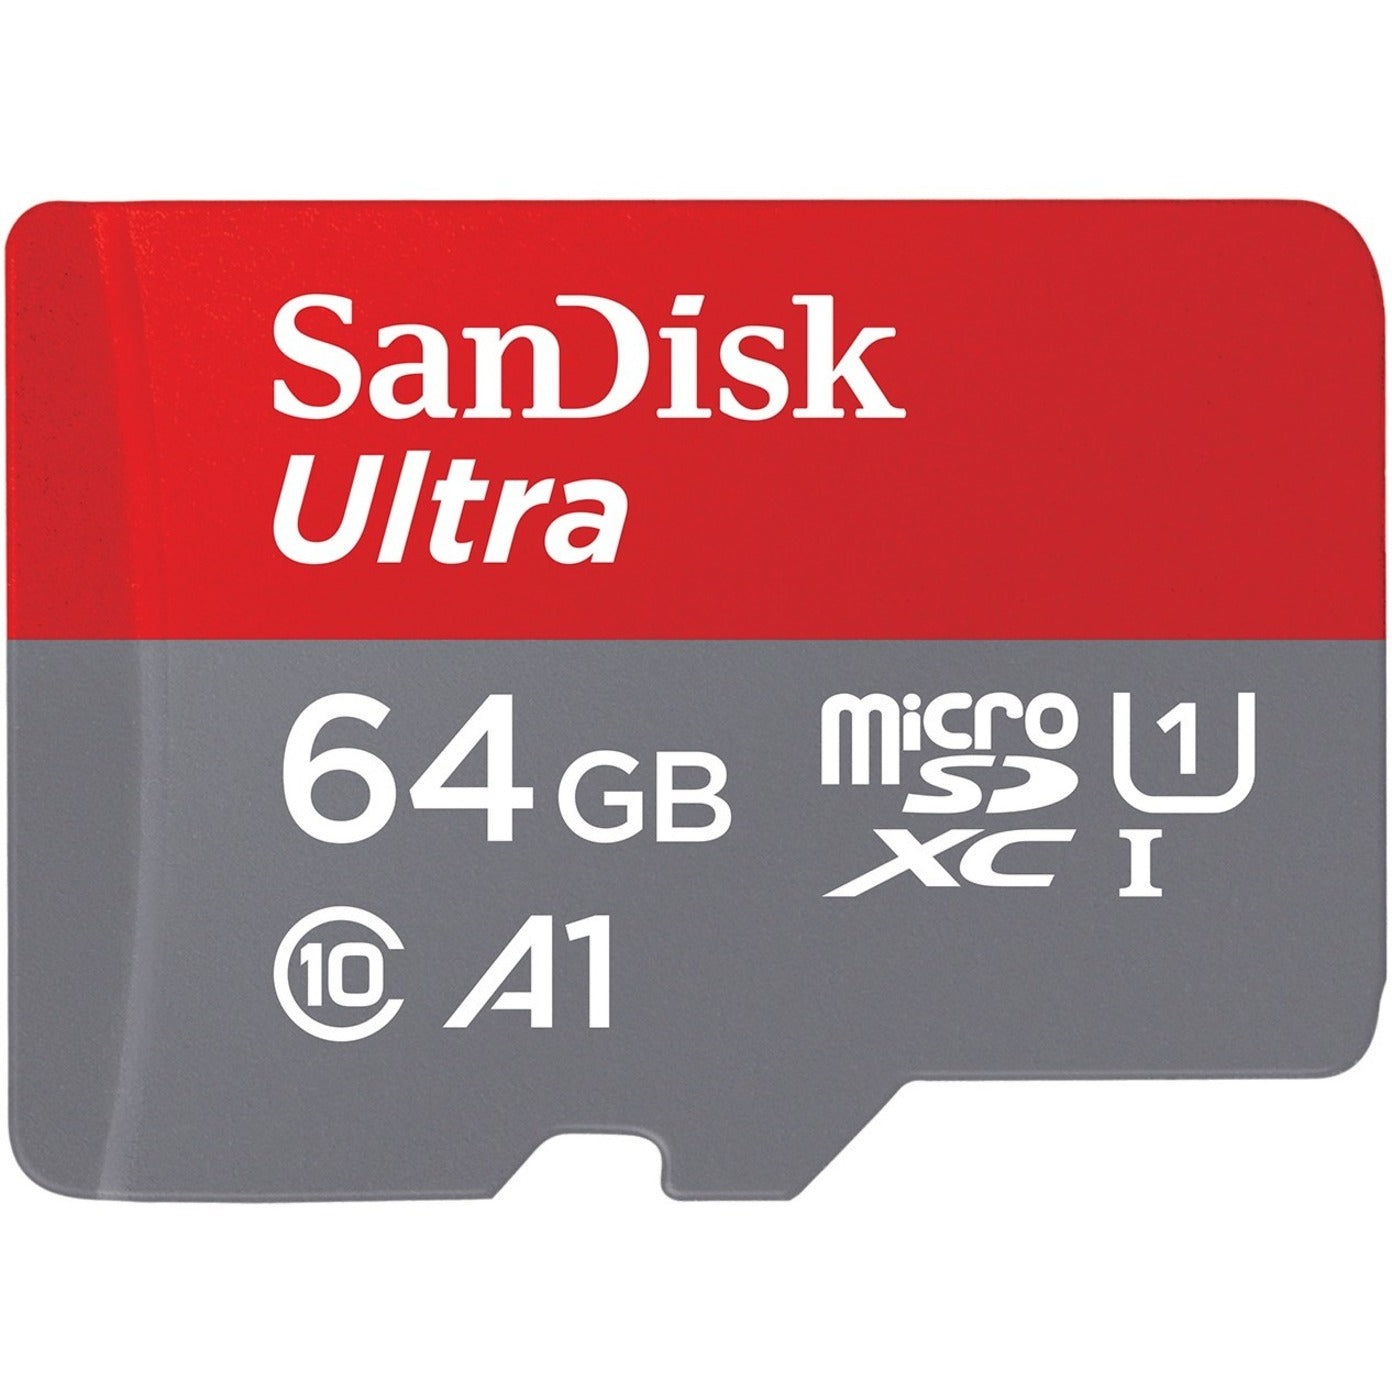 SanDisk SDSQUNC-064G-AN6MA Ultra microSD UHS-I Card 64GB, 10 Year Limited Warranty, 100 MB/s Read Speed